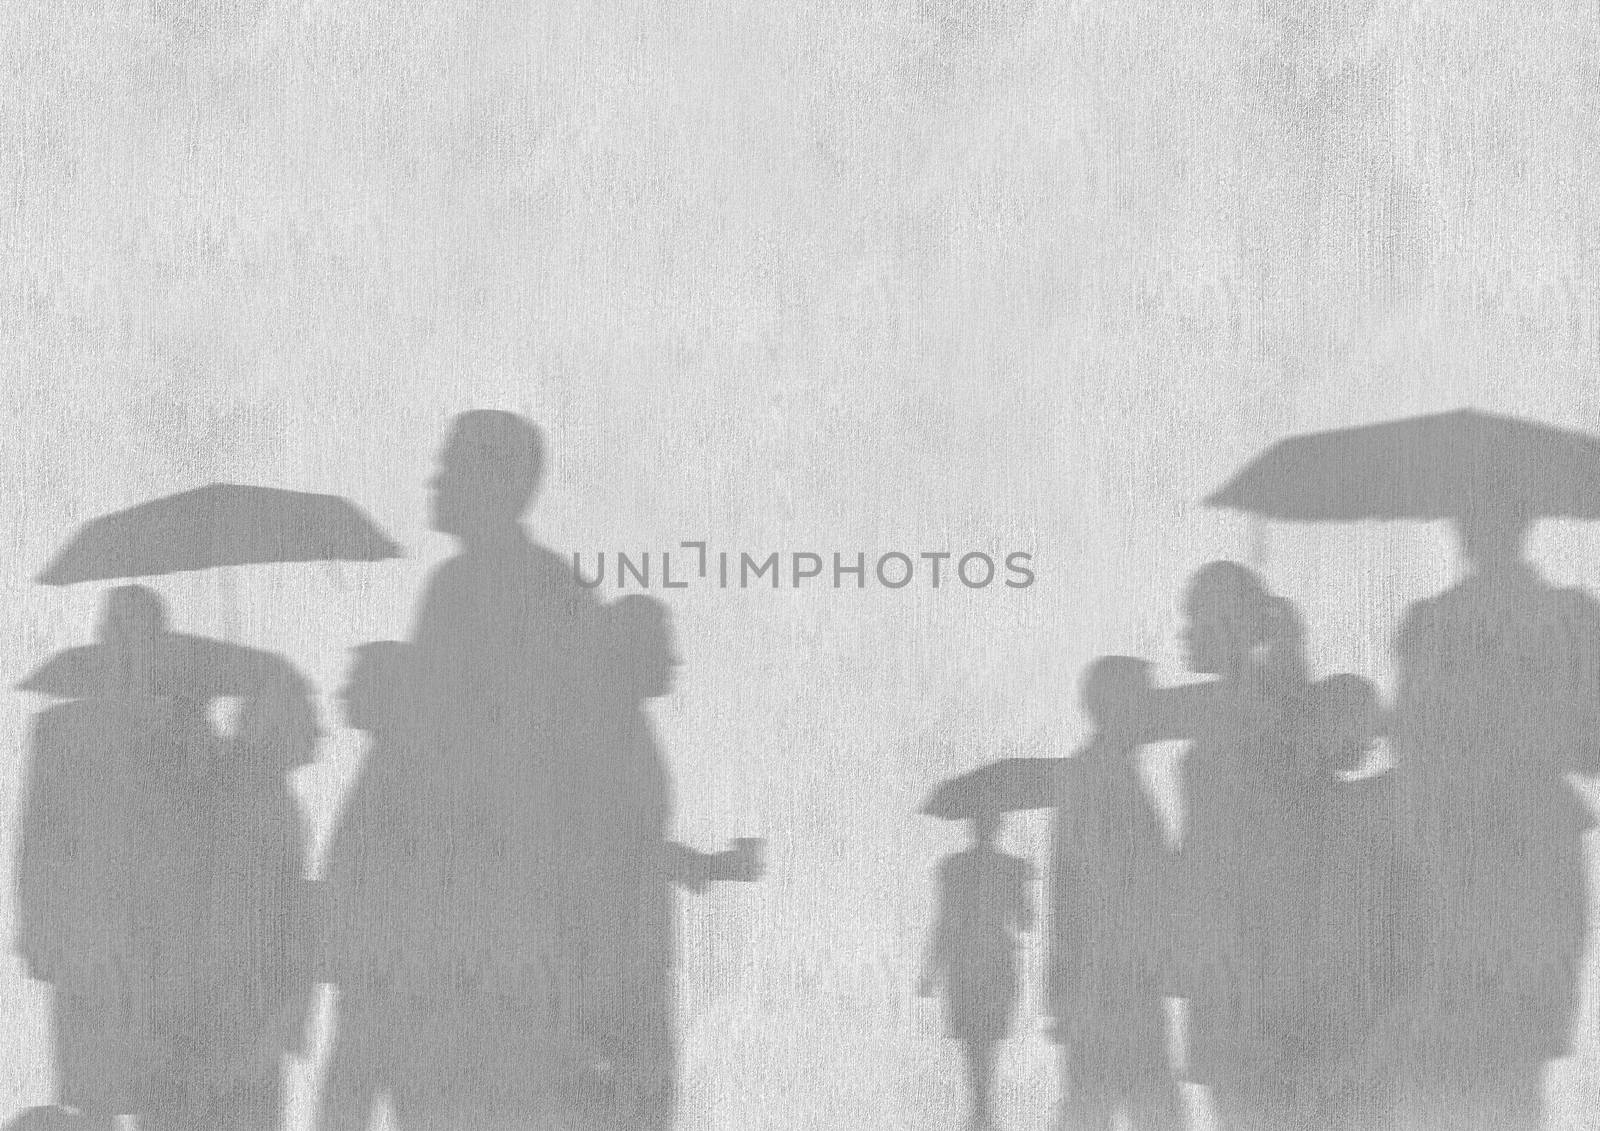 Digital composite of Business people silhouettes against white wall